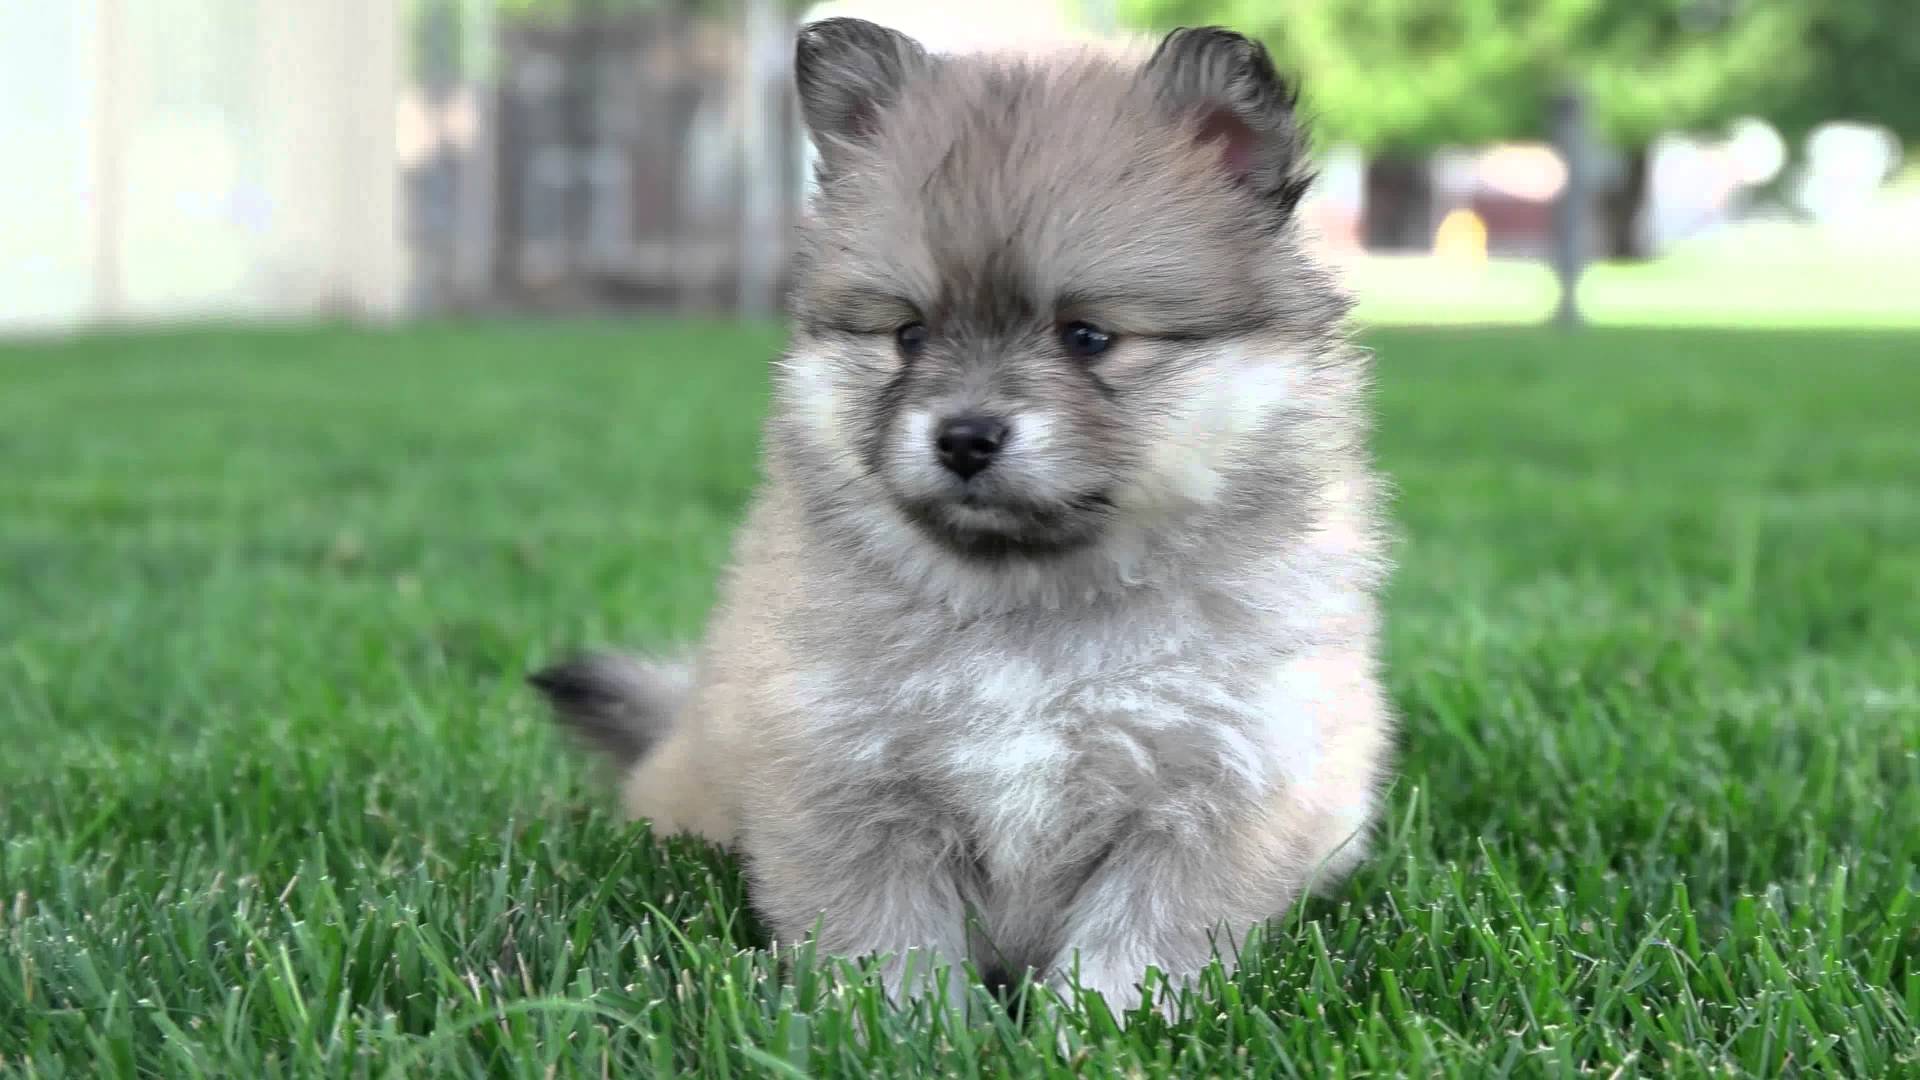 Precious Pomsky Puppies Are Here! Furry Babies